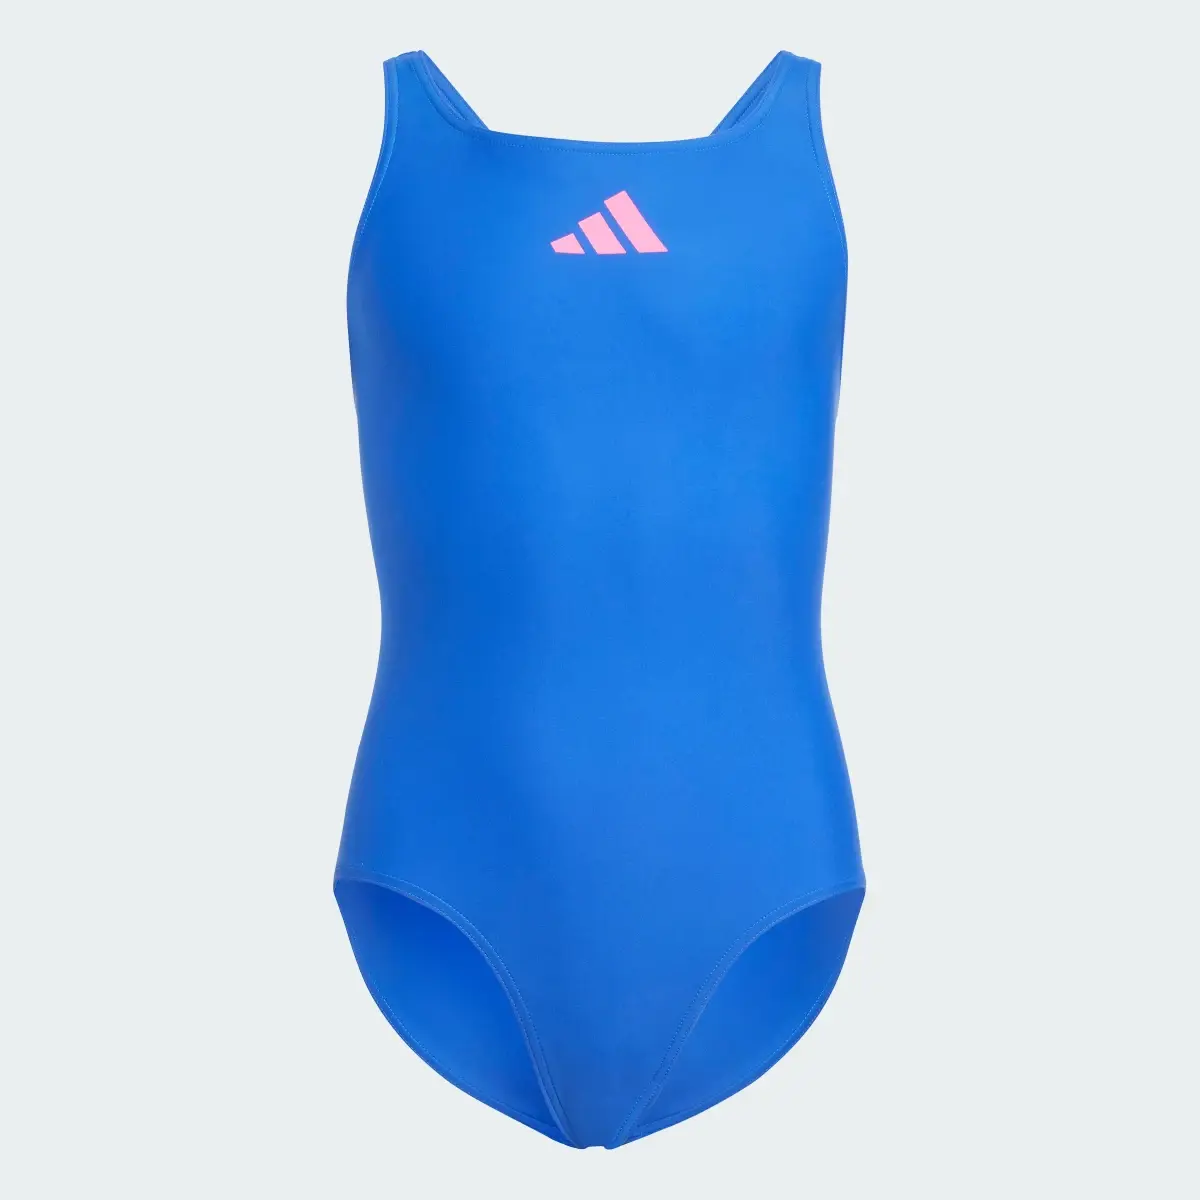 Adidas Solid Small Logo Swimsuit. 1